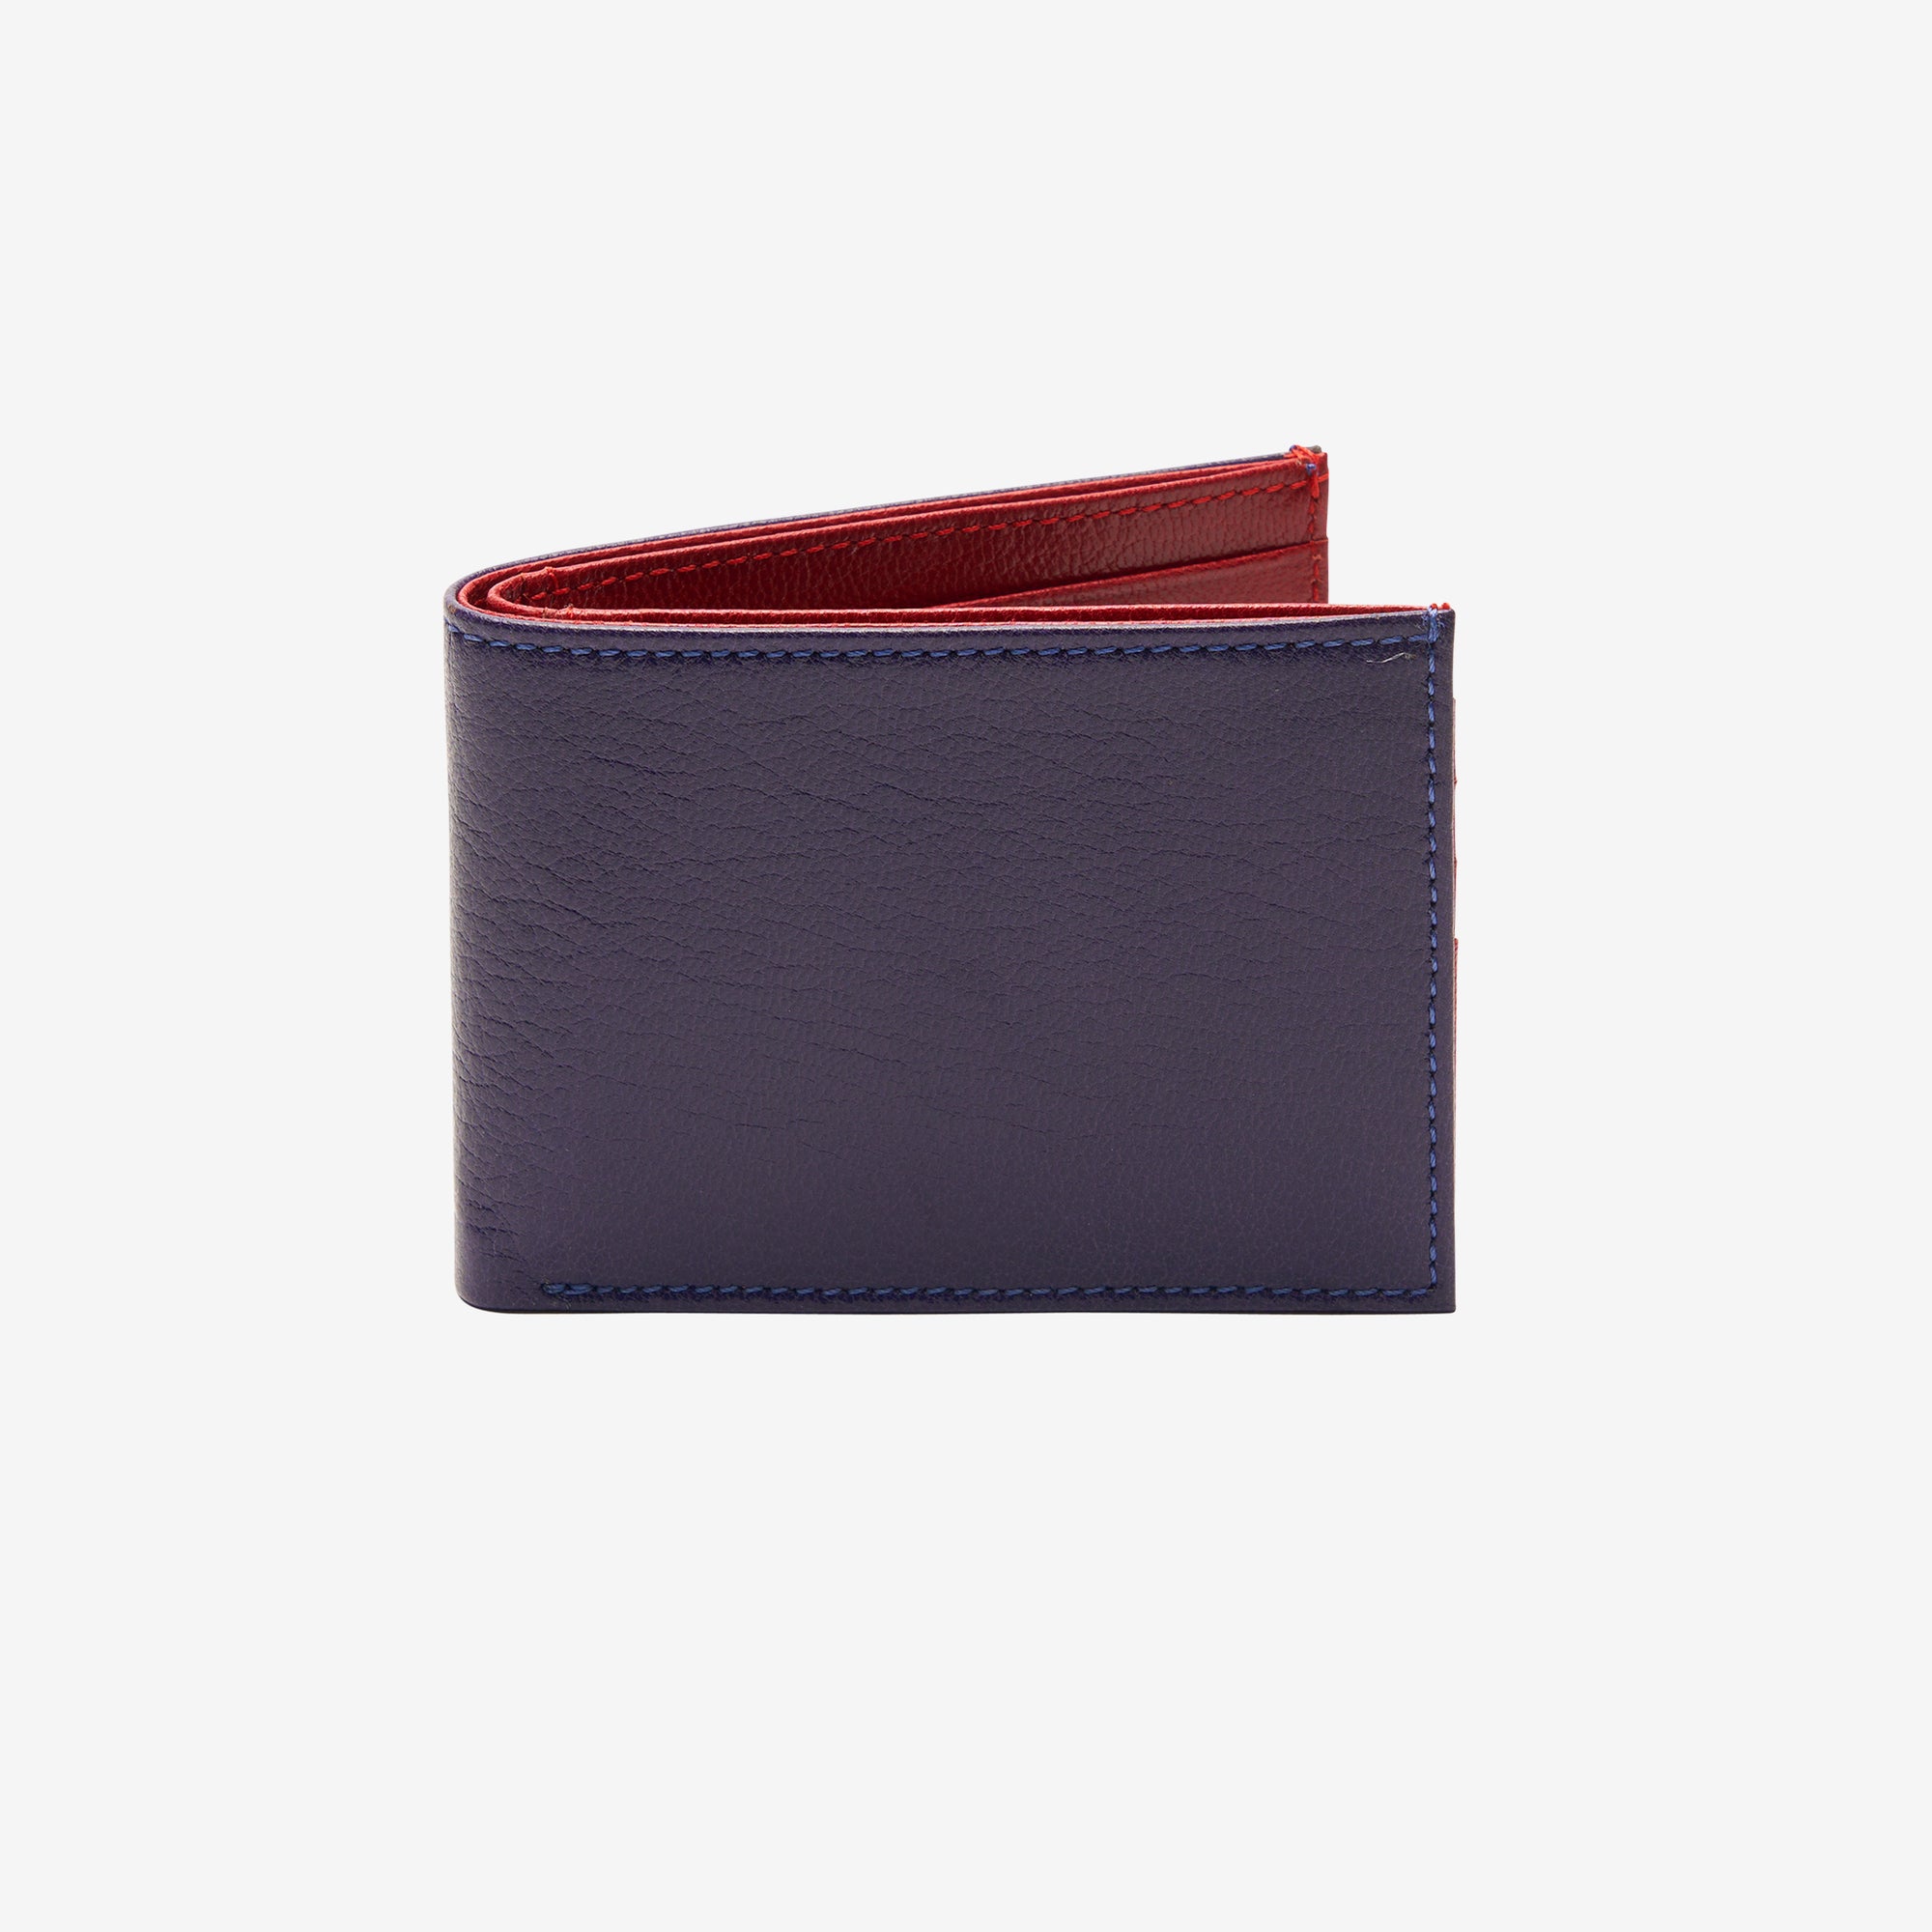     tusk-122-mens-compact-billfold-wallet-navy-and-red-front